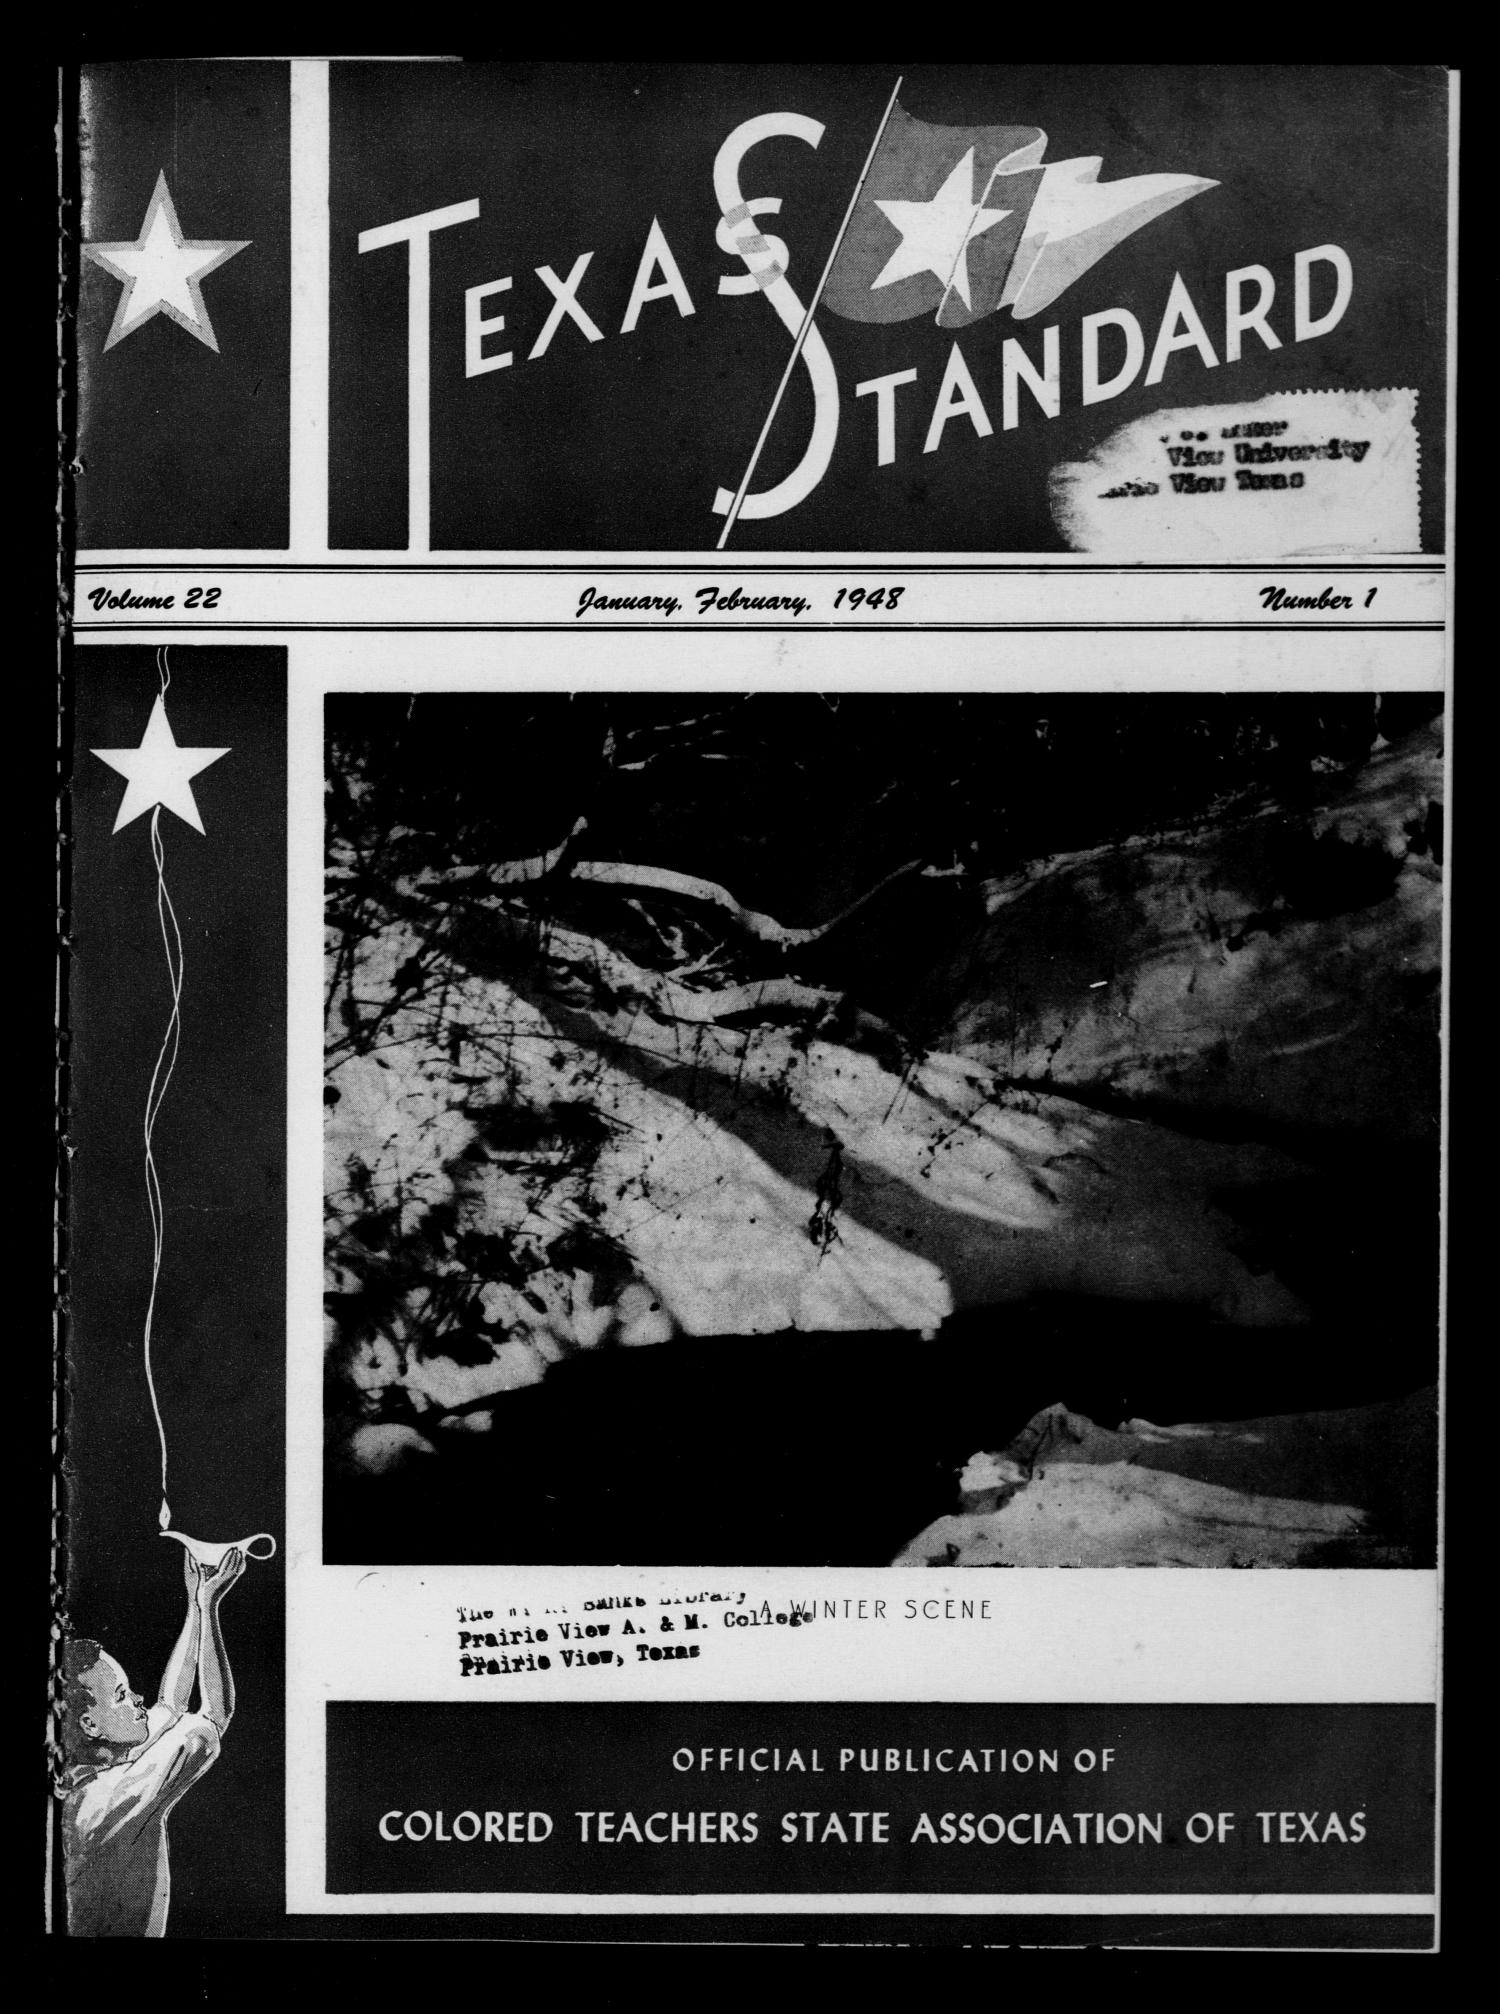 The Texas Standard, Volume 22, Number 1, January-February 1948
                                                
                                                    Front Cover
                                                